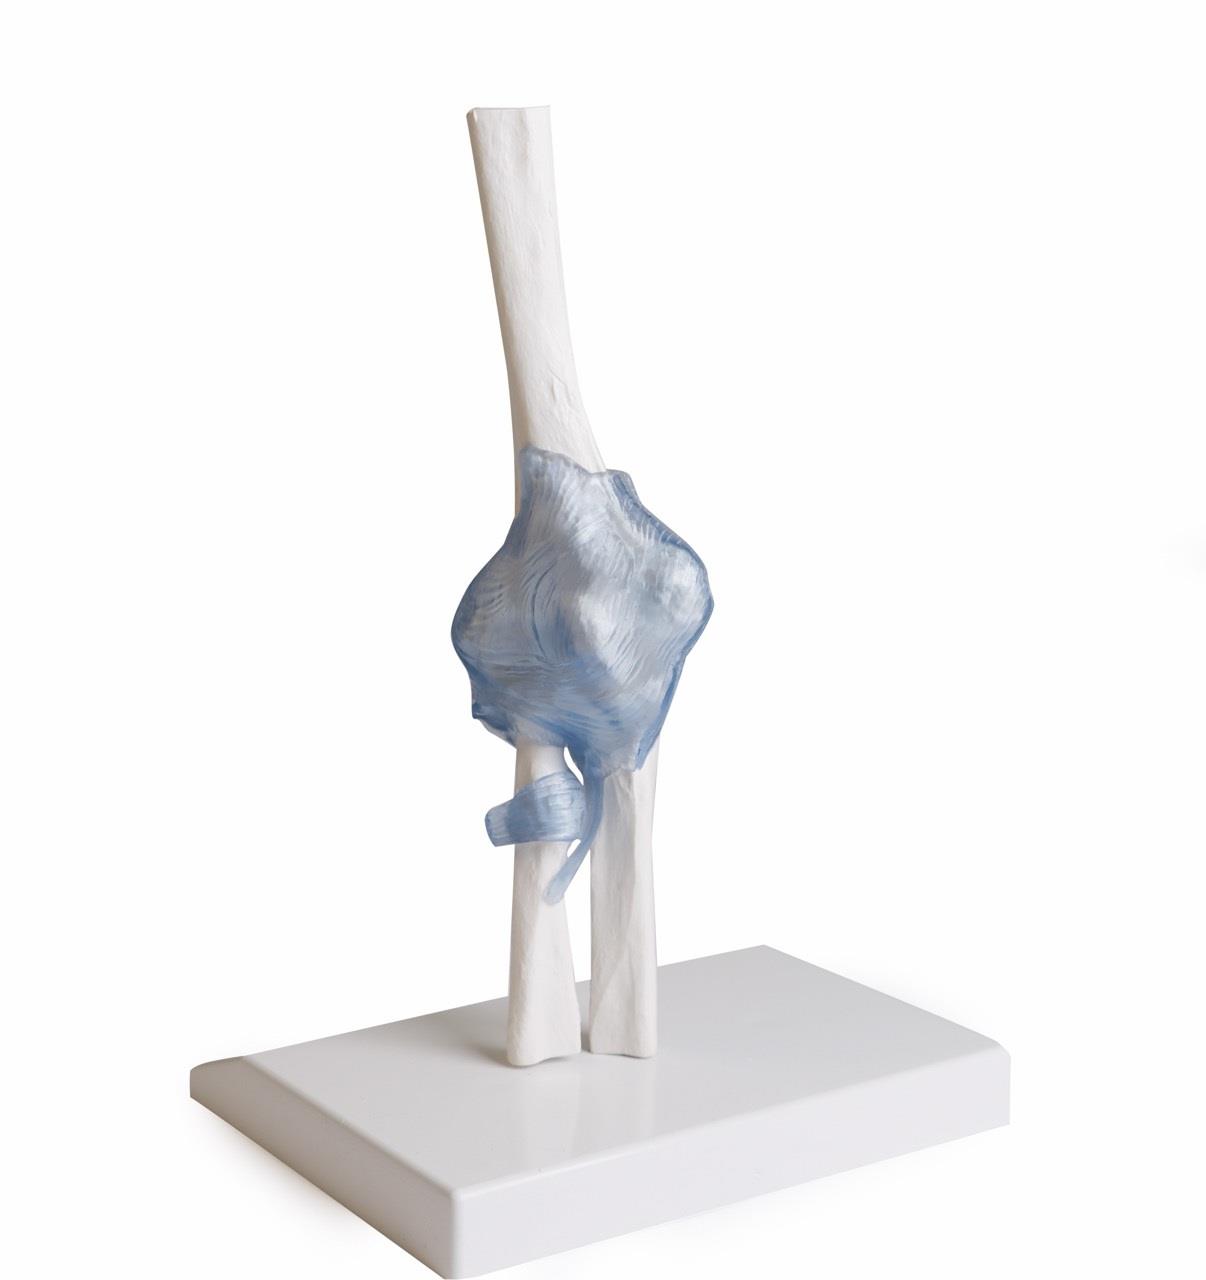 Elbow joint with ligaments with stand